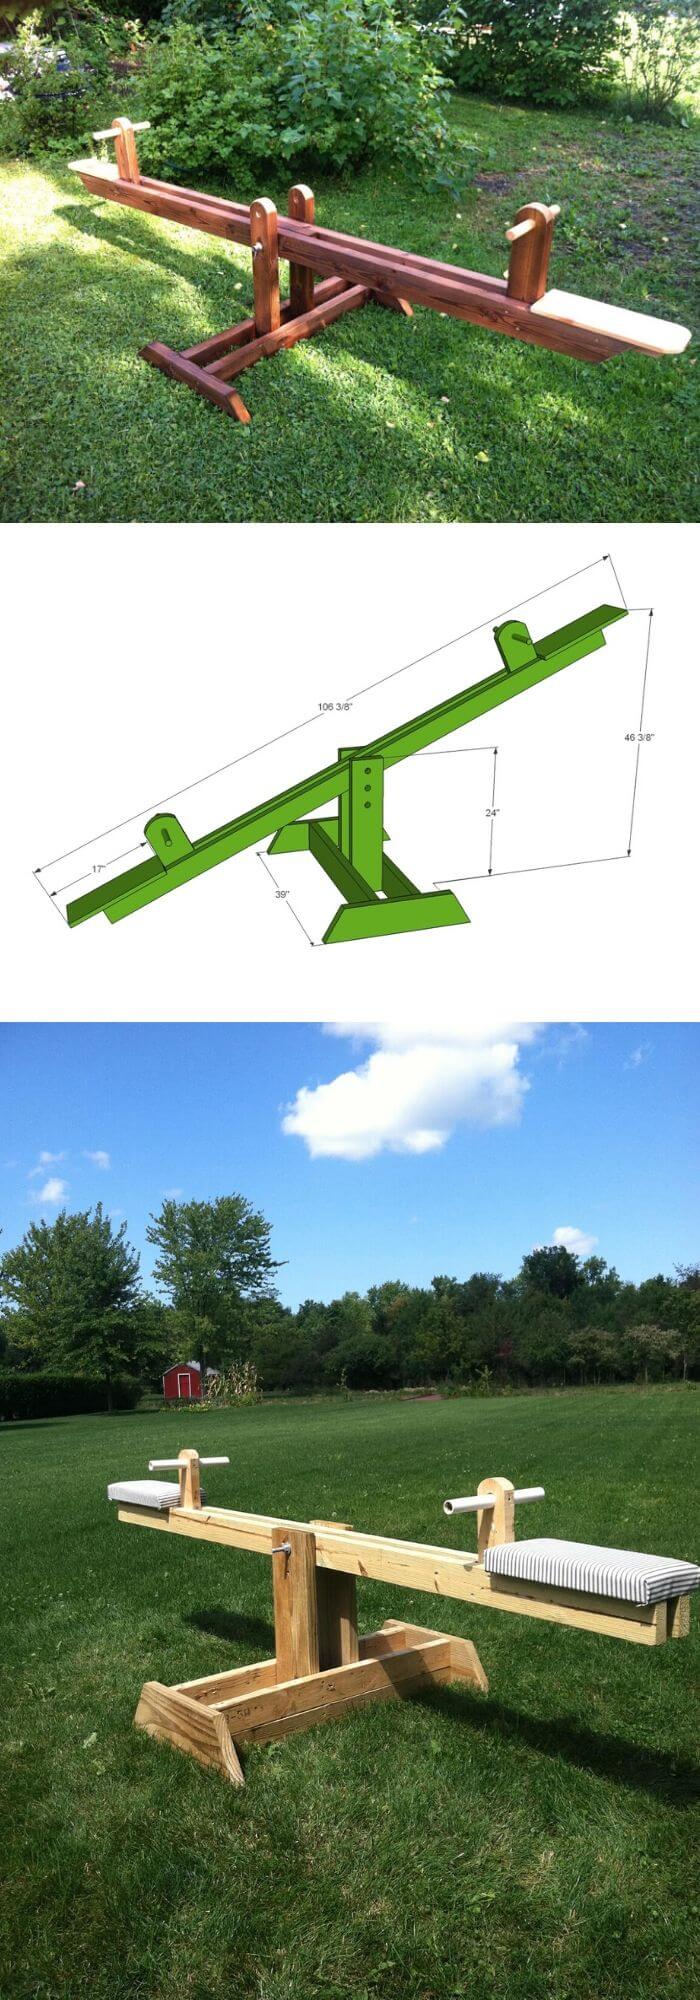 A Backyard with a See-Saw